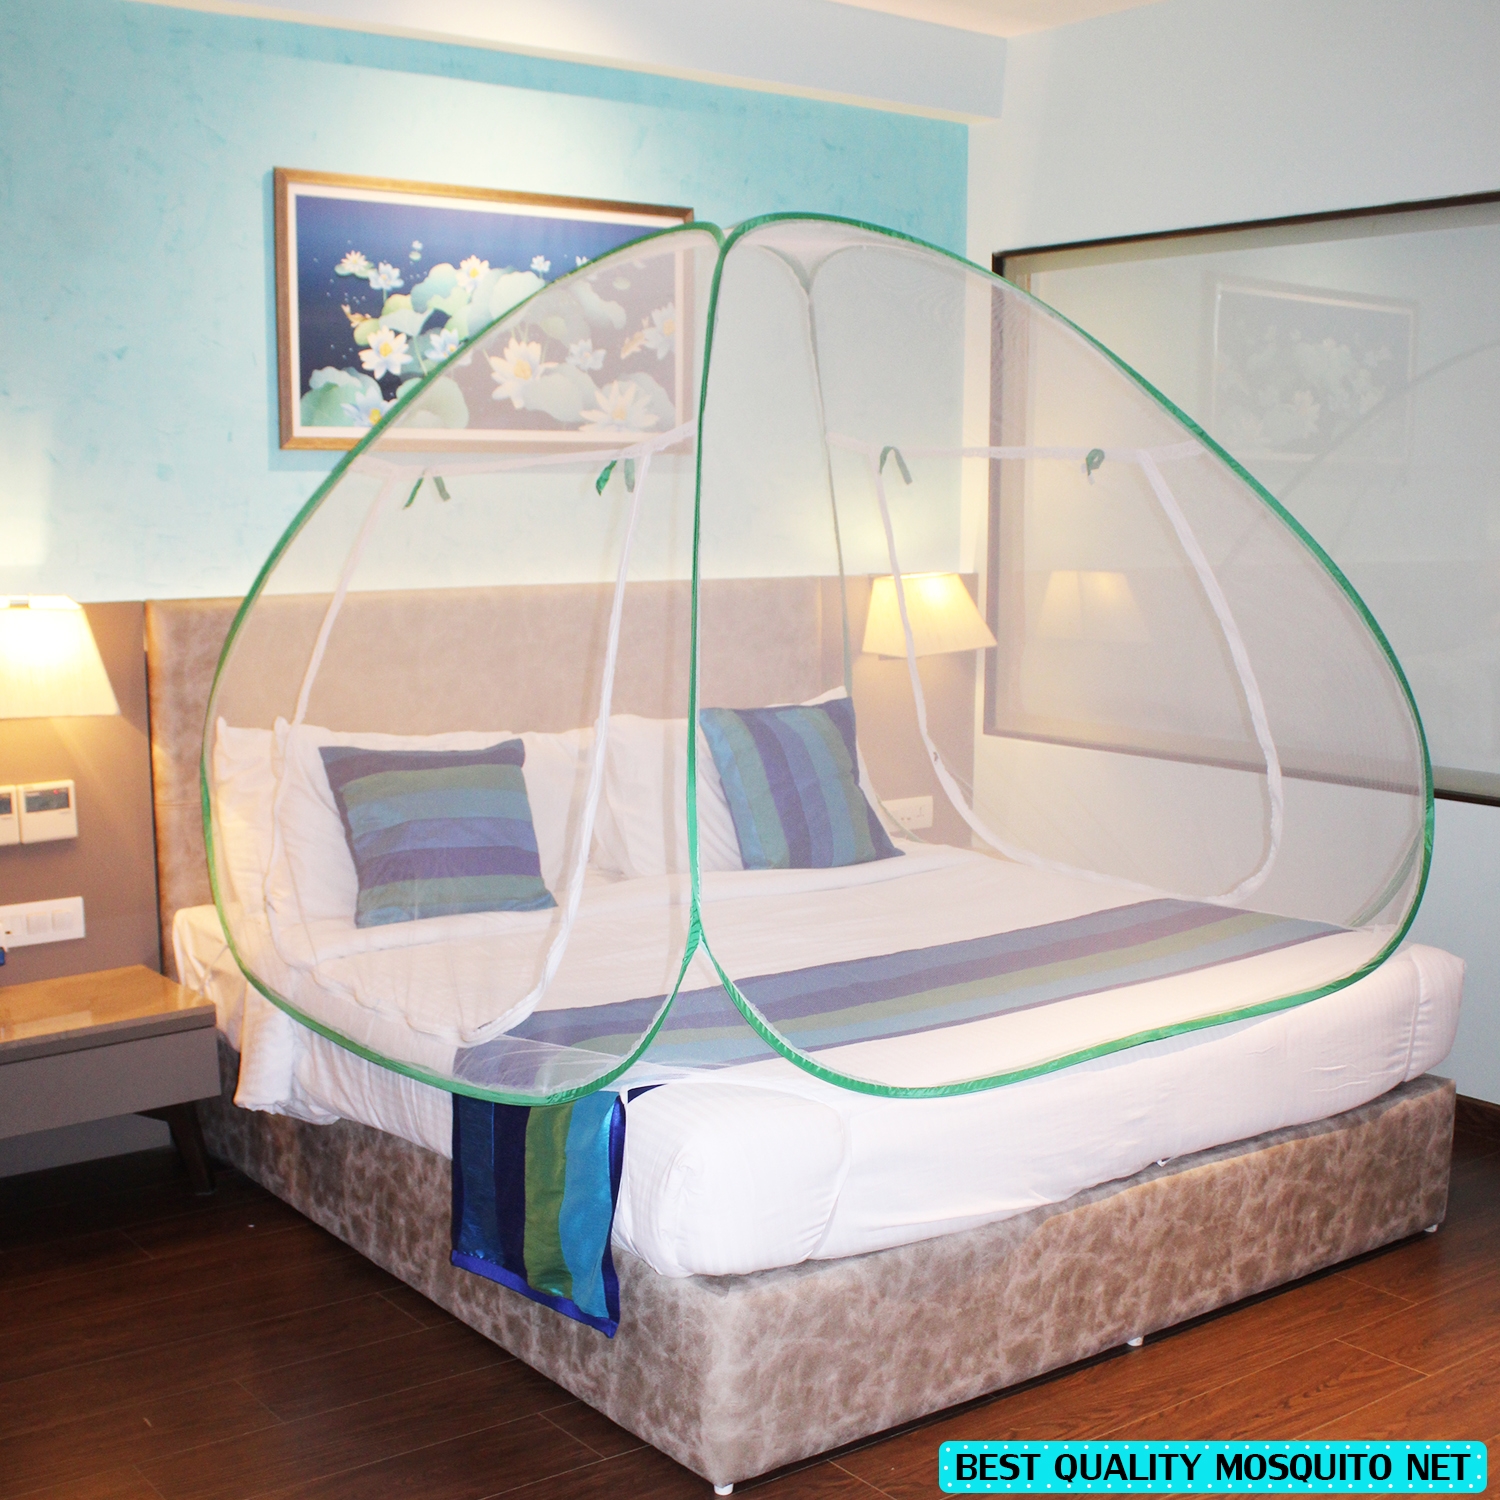  Green Mosquito Net Foldable Double Bed Net King Size 